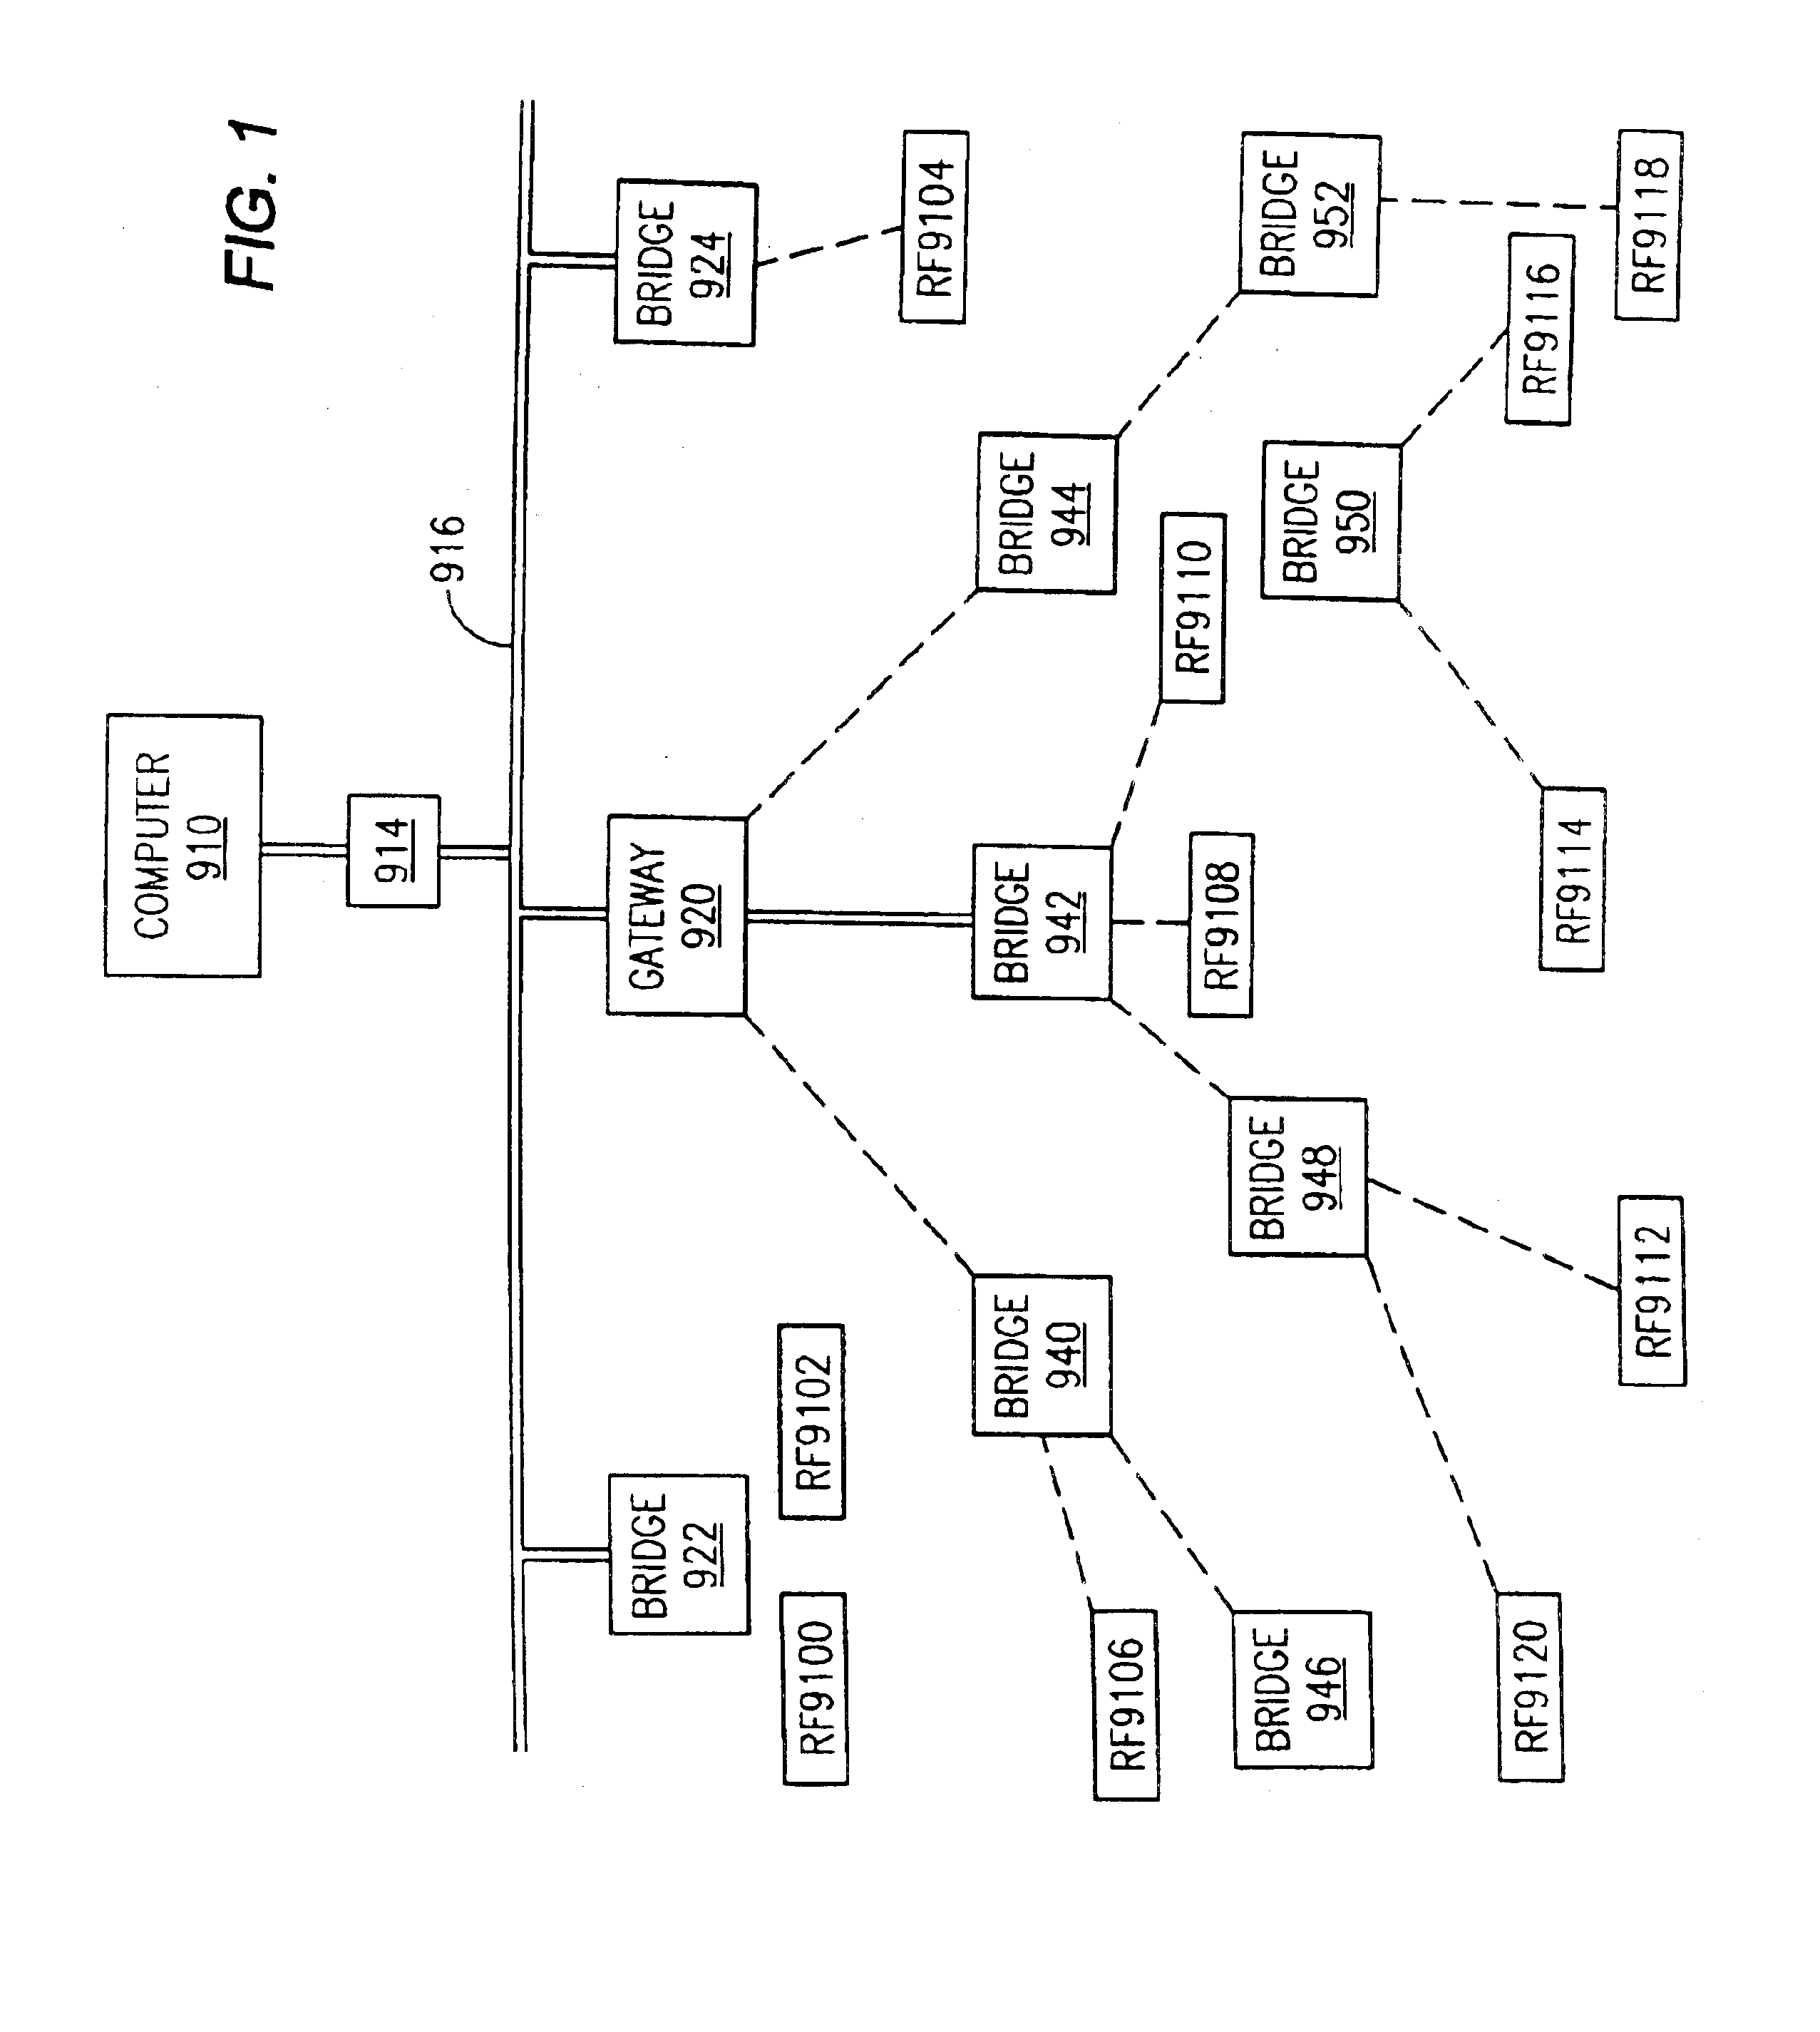 Radio frequency local area network